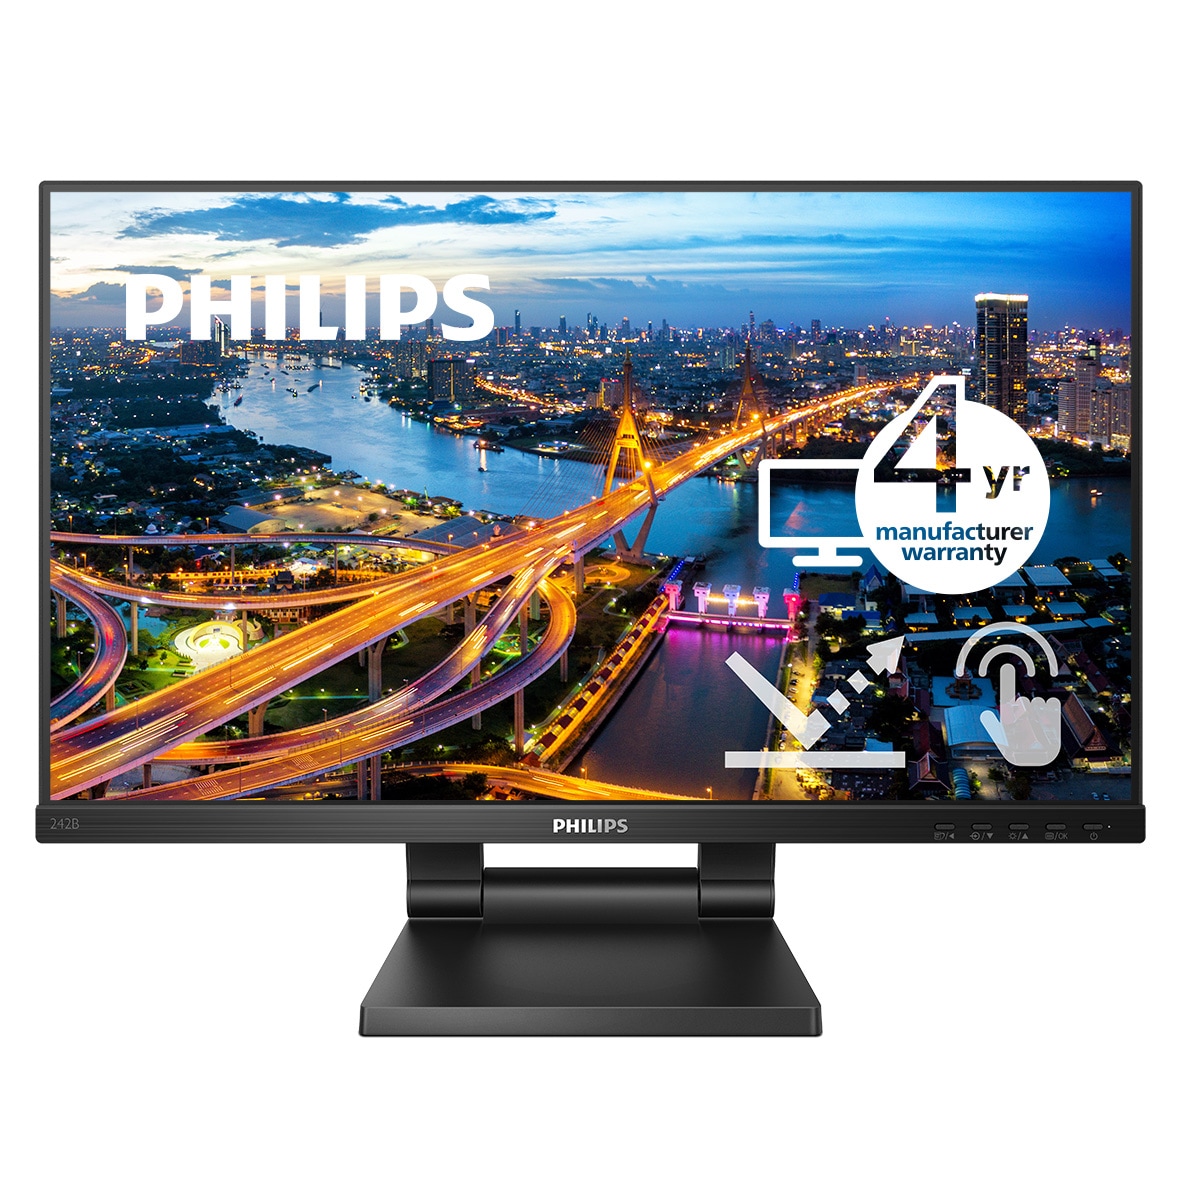 PHILIPS 242B1TC - 24 inch Touch Monitor, LED, FHD, VGA, DP, HDMI, 4 Year Manufacturer Warranty - 24"